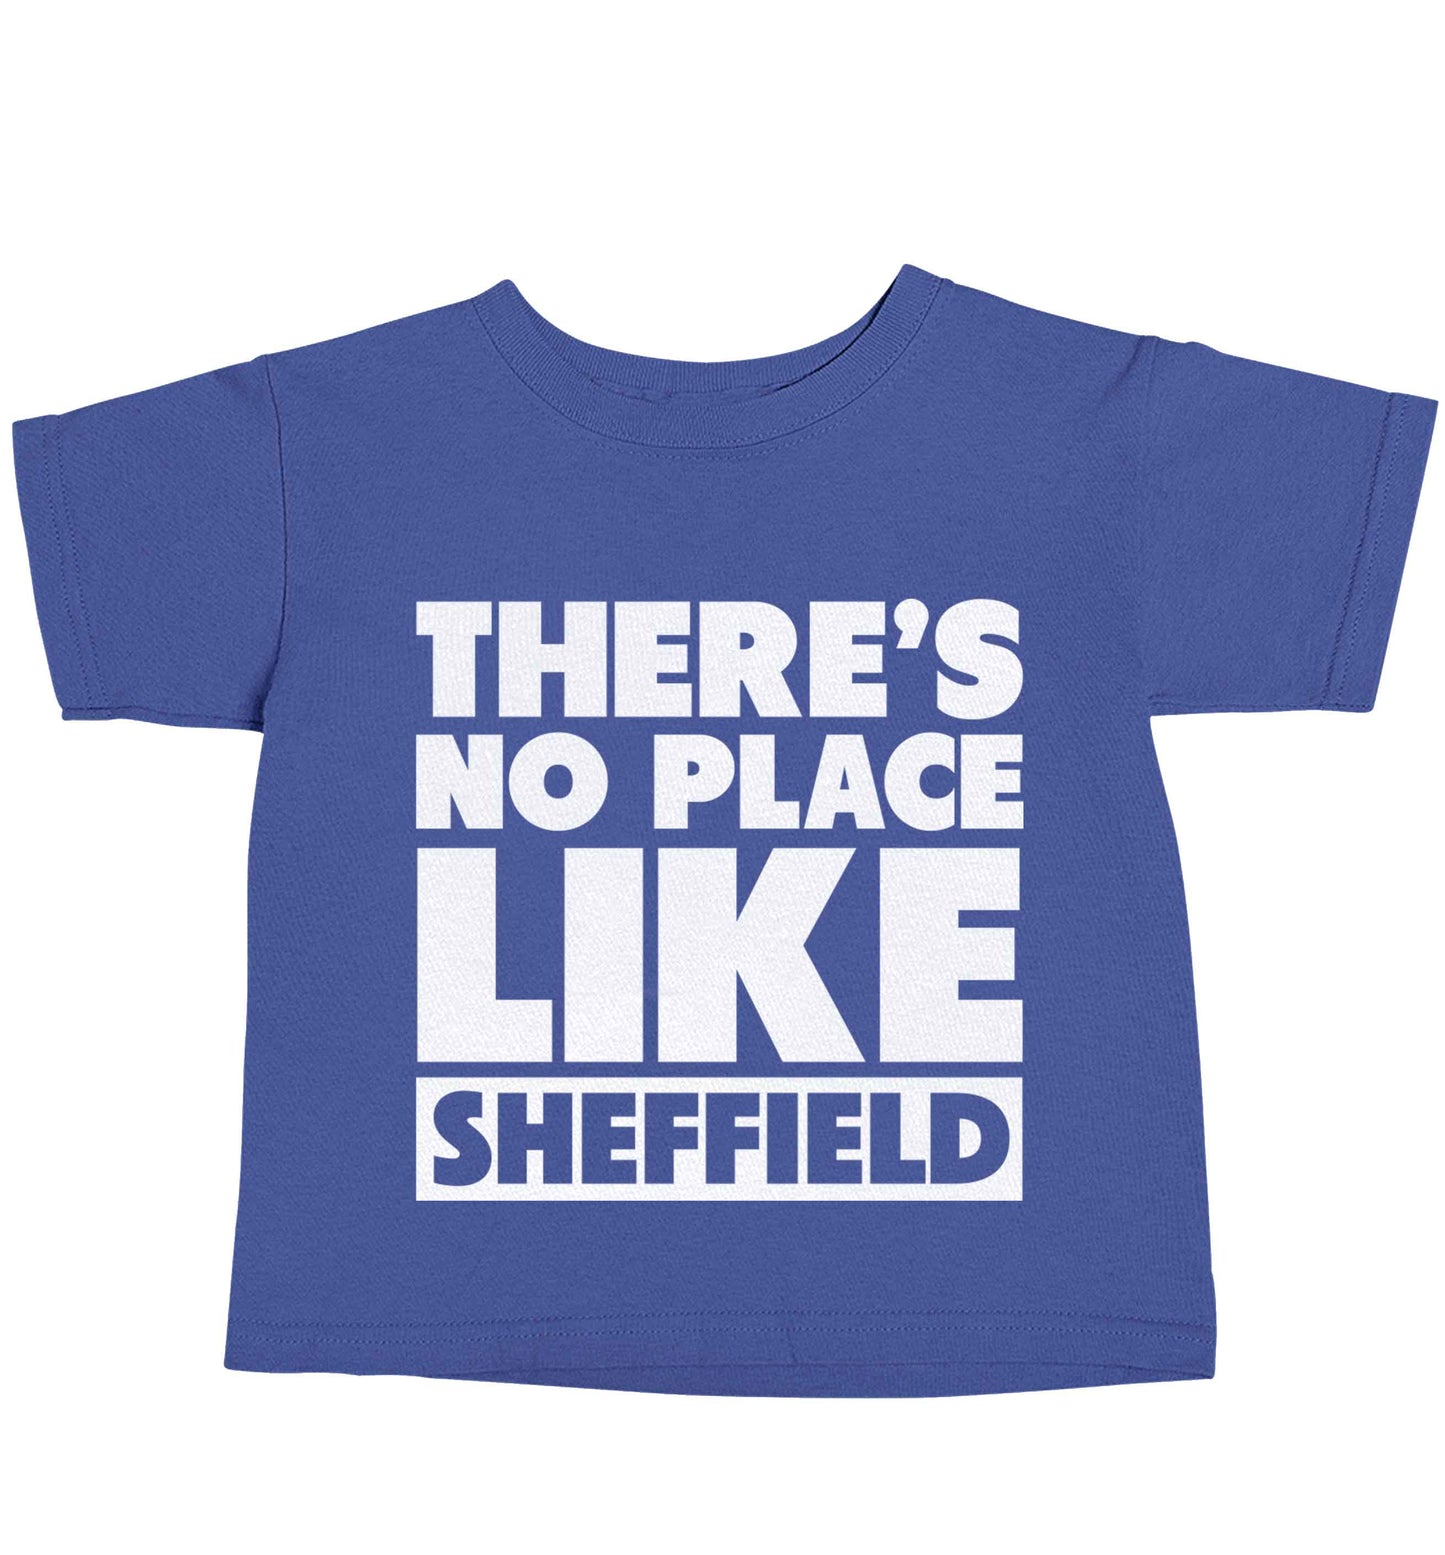 There's no place like Sheffield blue baby toddler Tshirt 2 Years